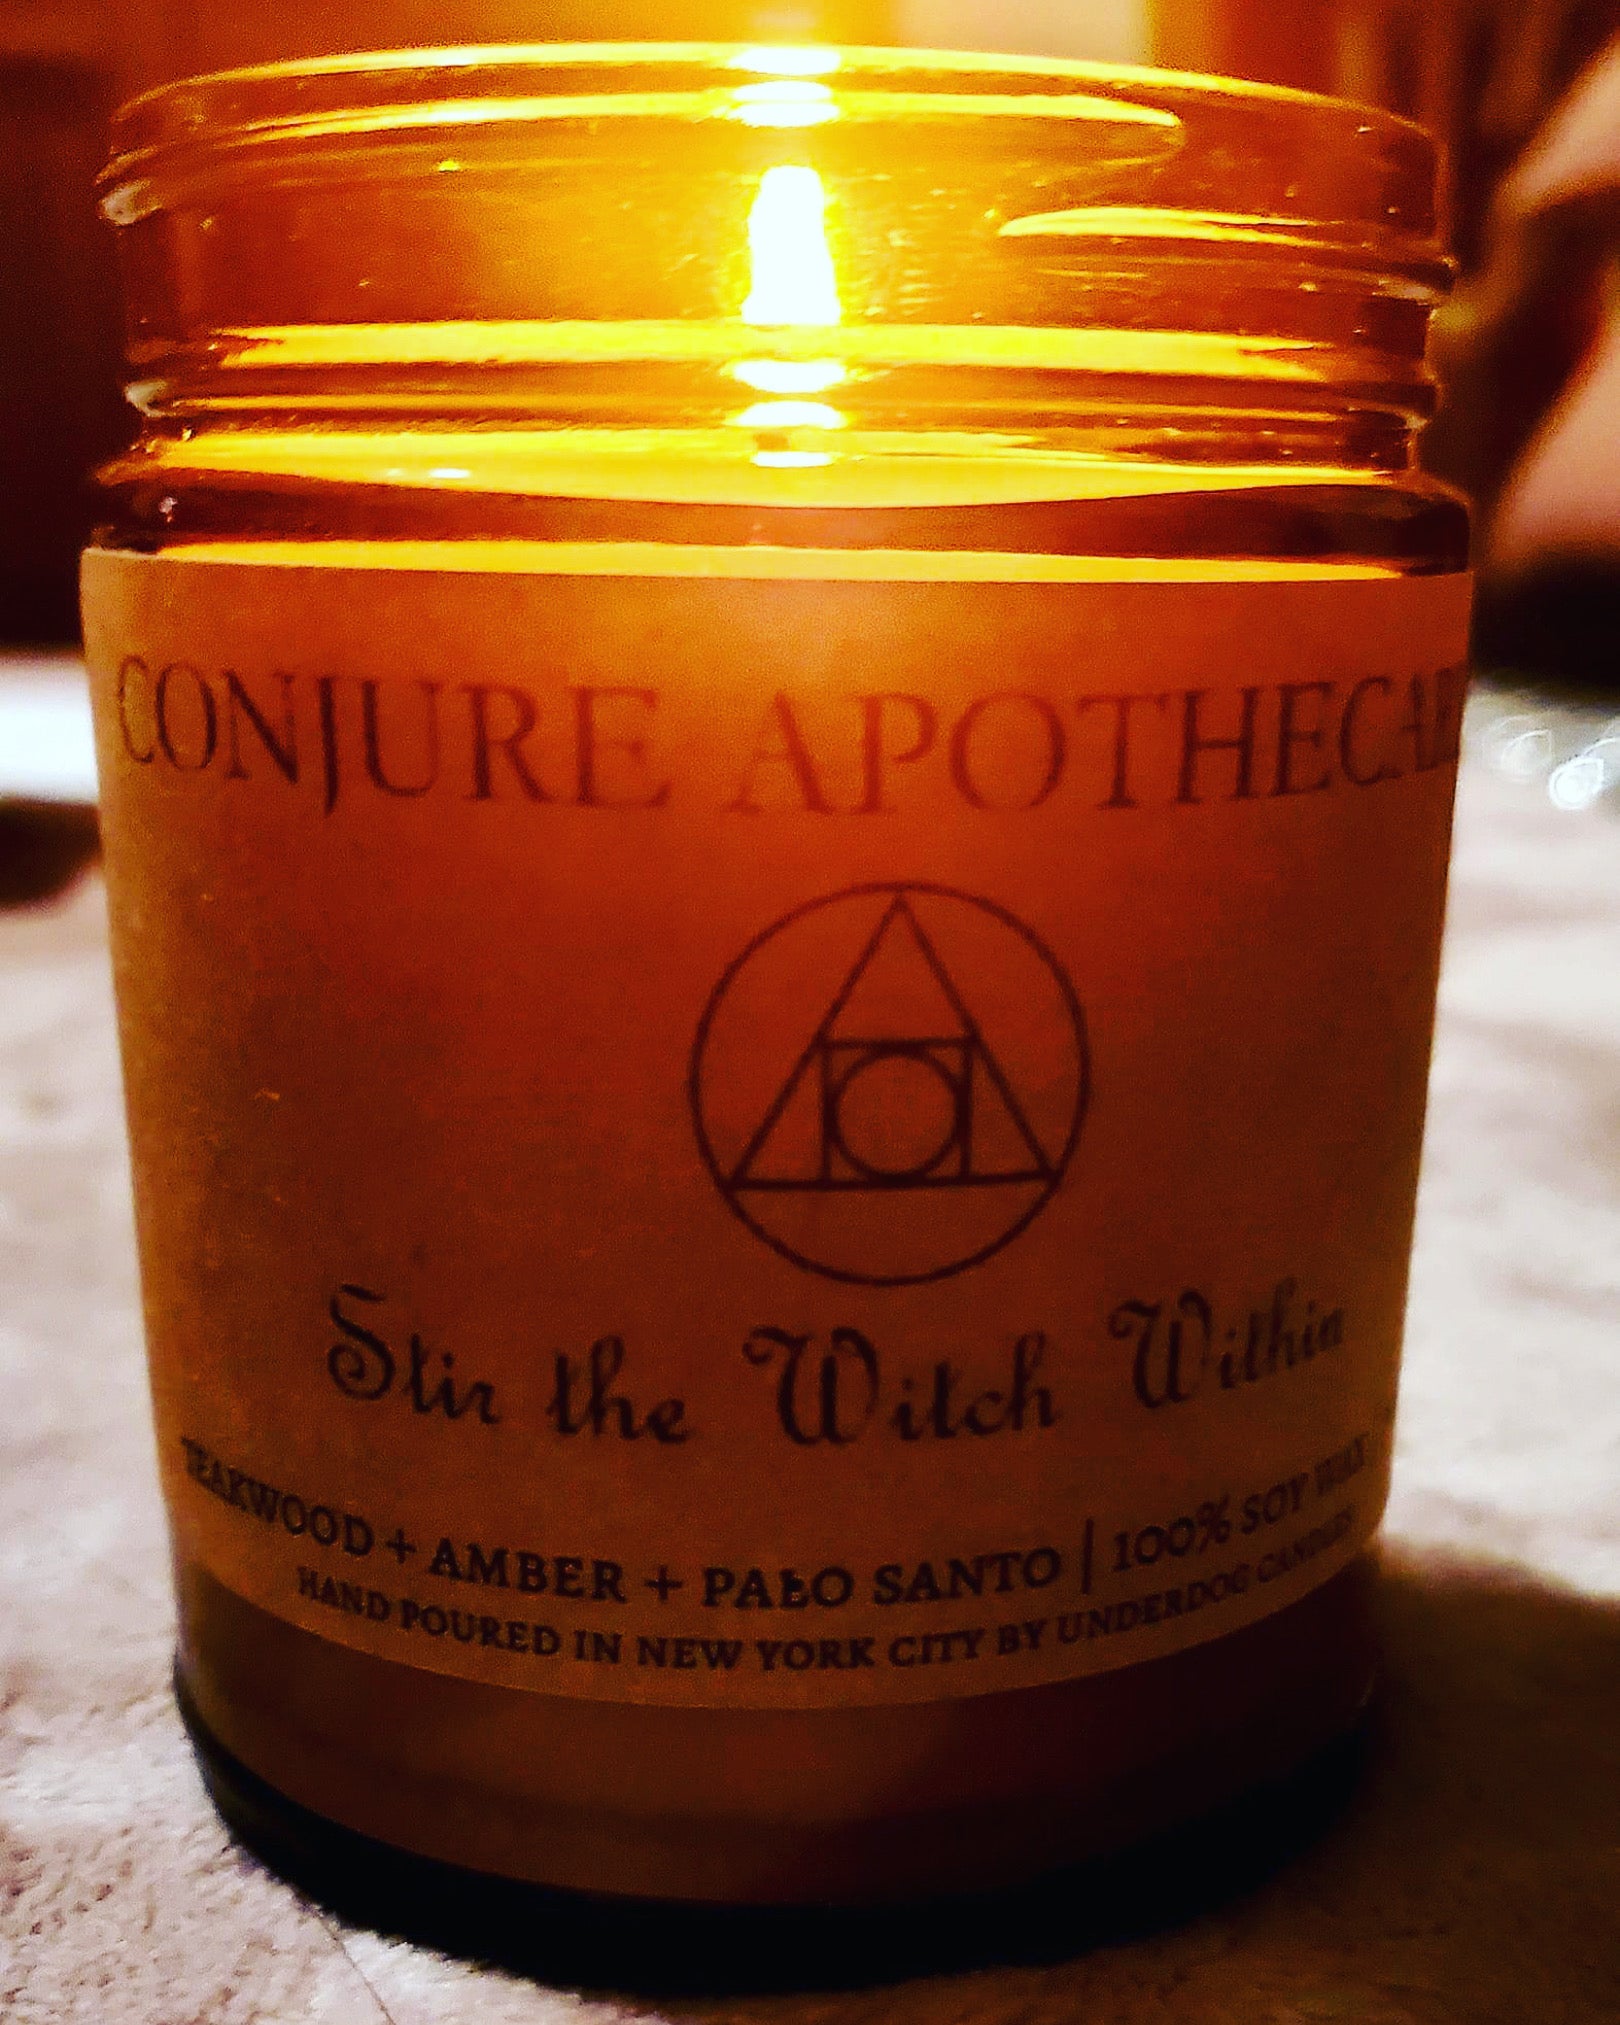 CONJURE APOTHECARY SIGNATURE CANDLE